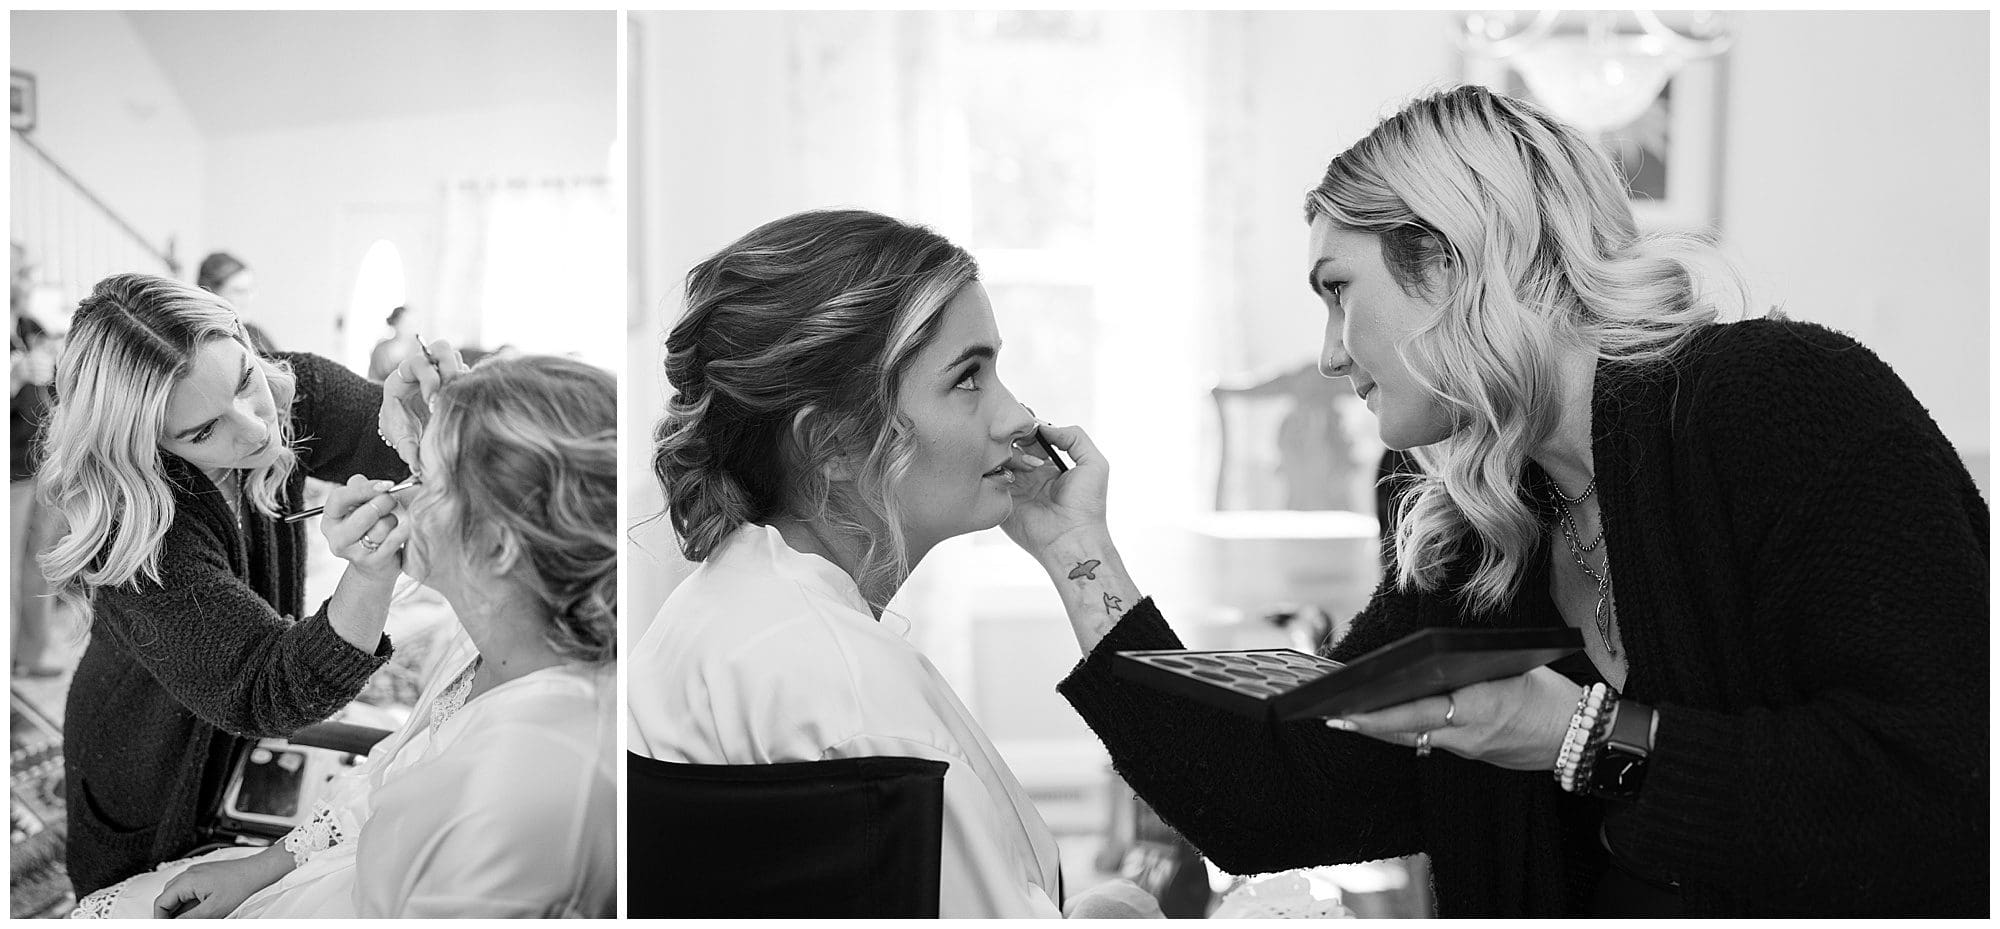 Two black and white photos showing a bride getting her makeup done by a professional makeup artist in a busy room.